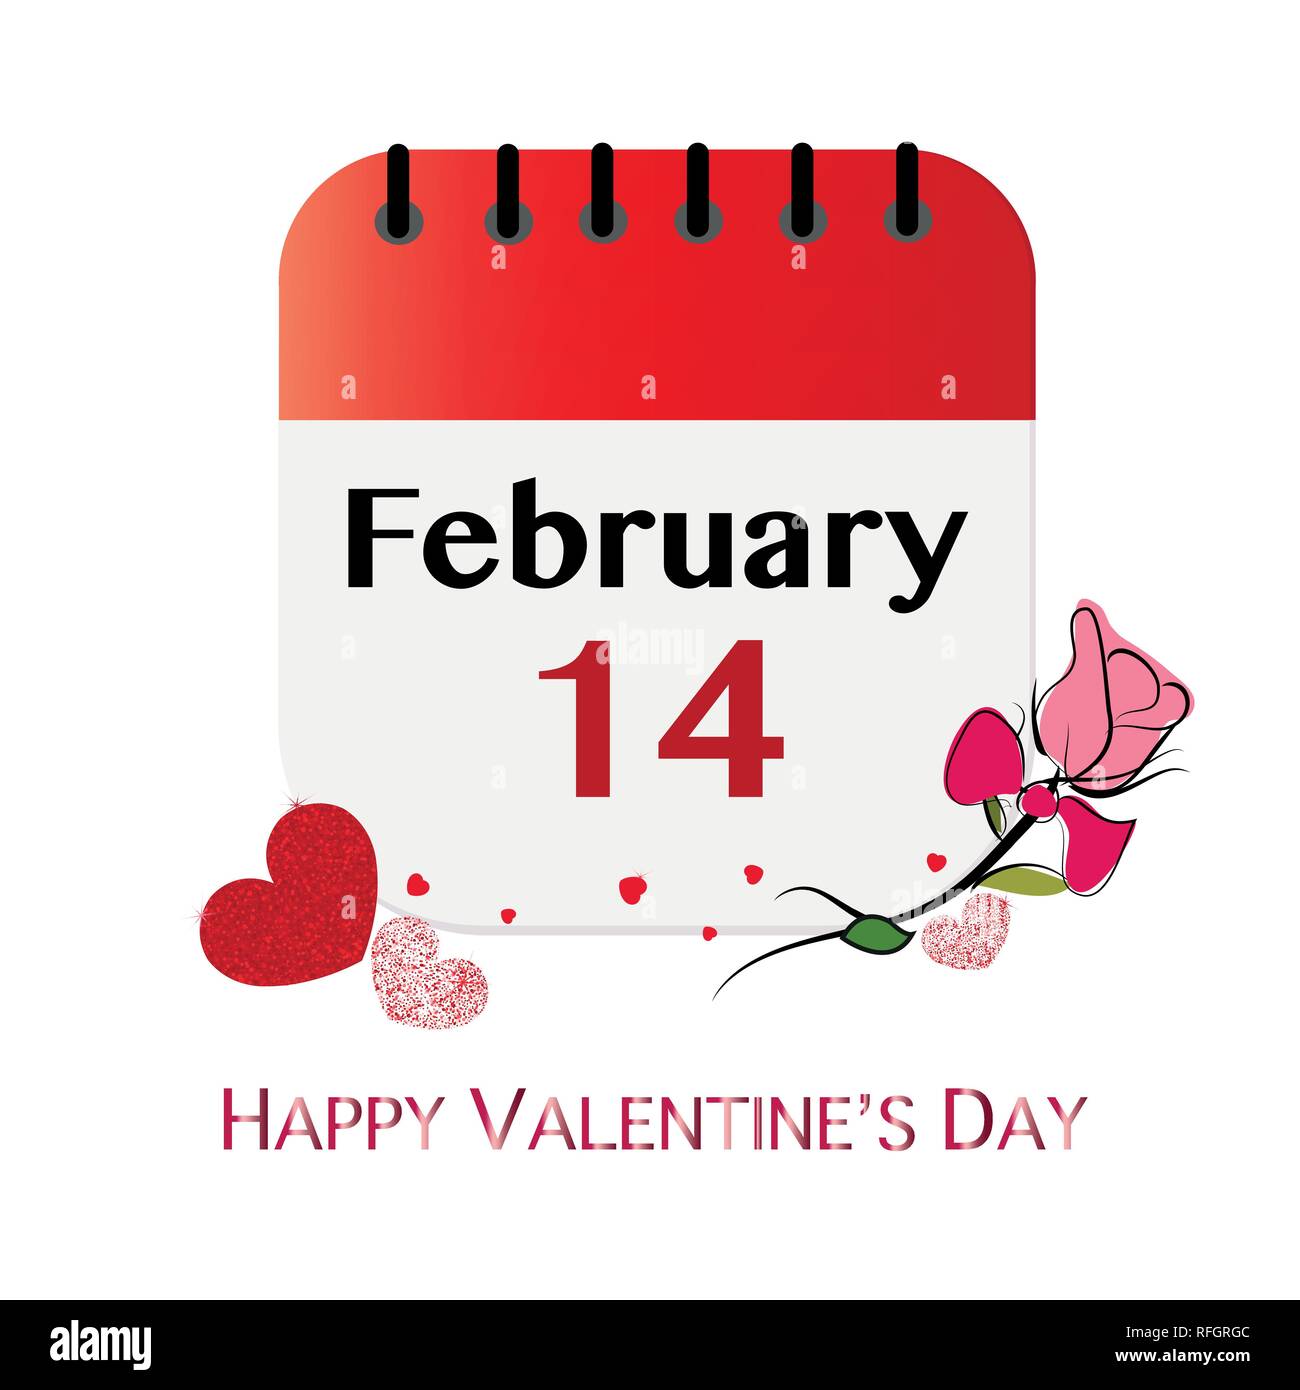 Happy Valentine's Day 2022 Greetings, Quotes and Images: WhatsApp Messages,  GIFs, Wishes, HD Wallpapers and Status for Your Partner for February 14  Celebrations